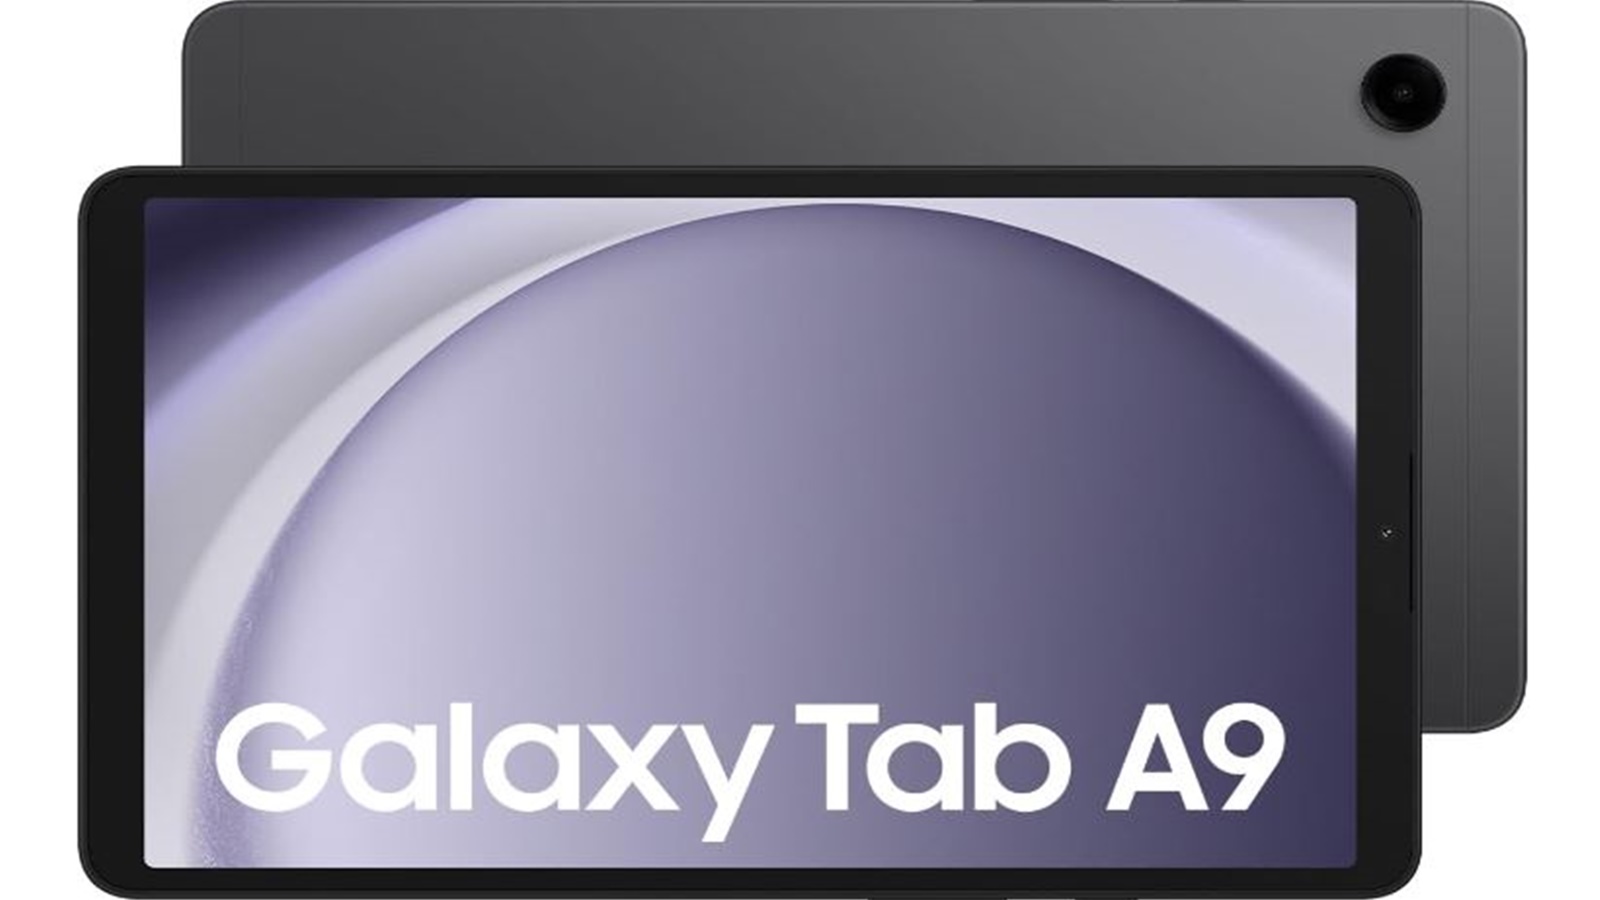 Samsung just announced 3 new Android tablets. Here's a first look